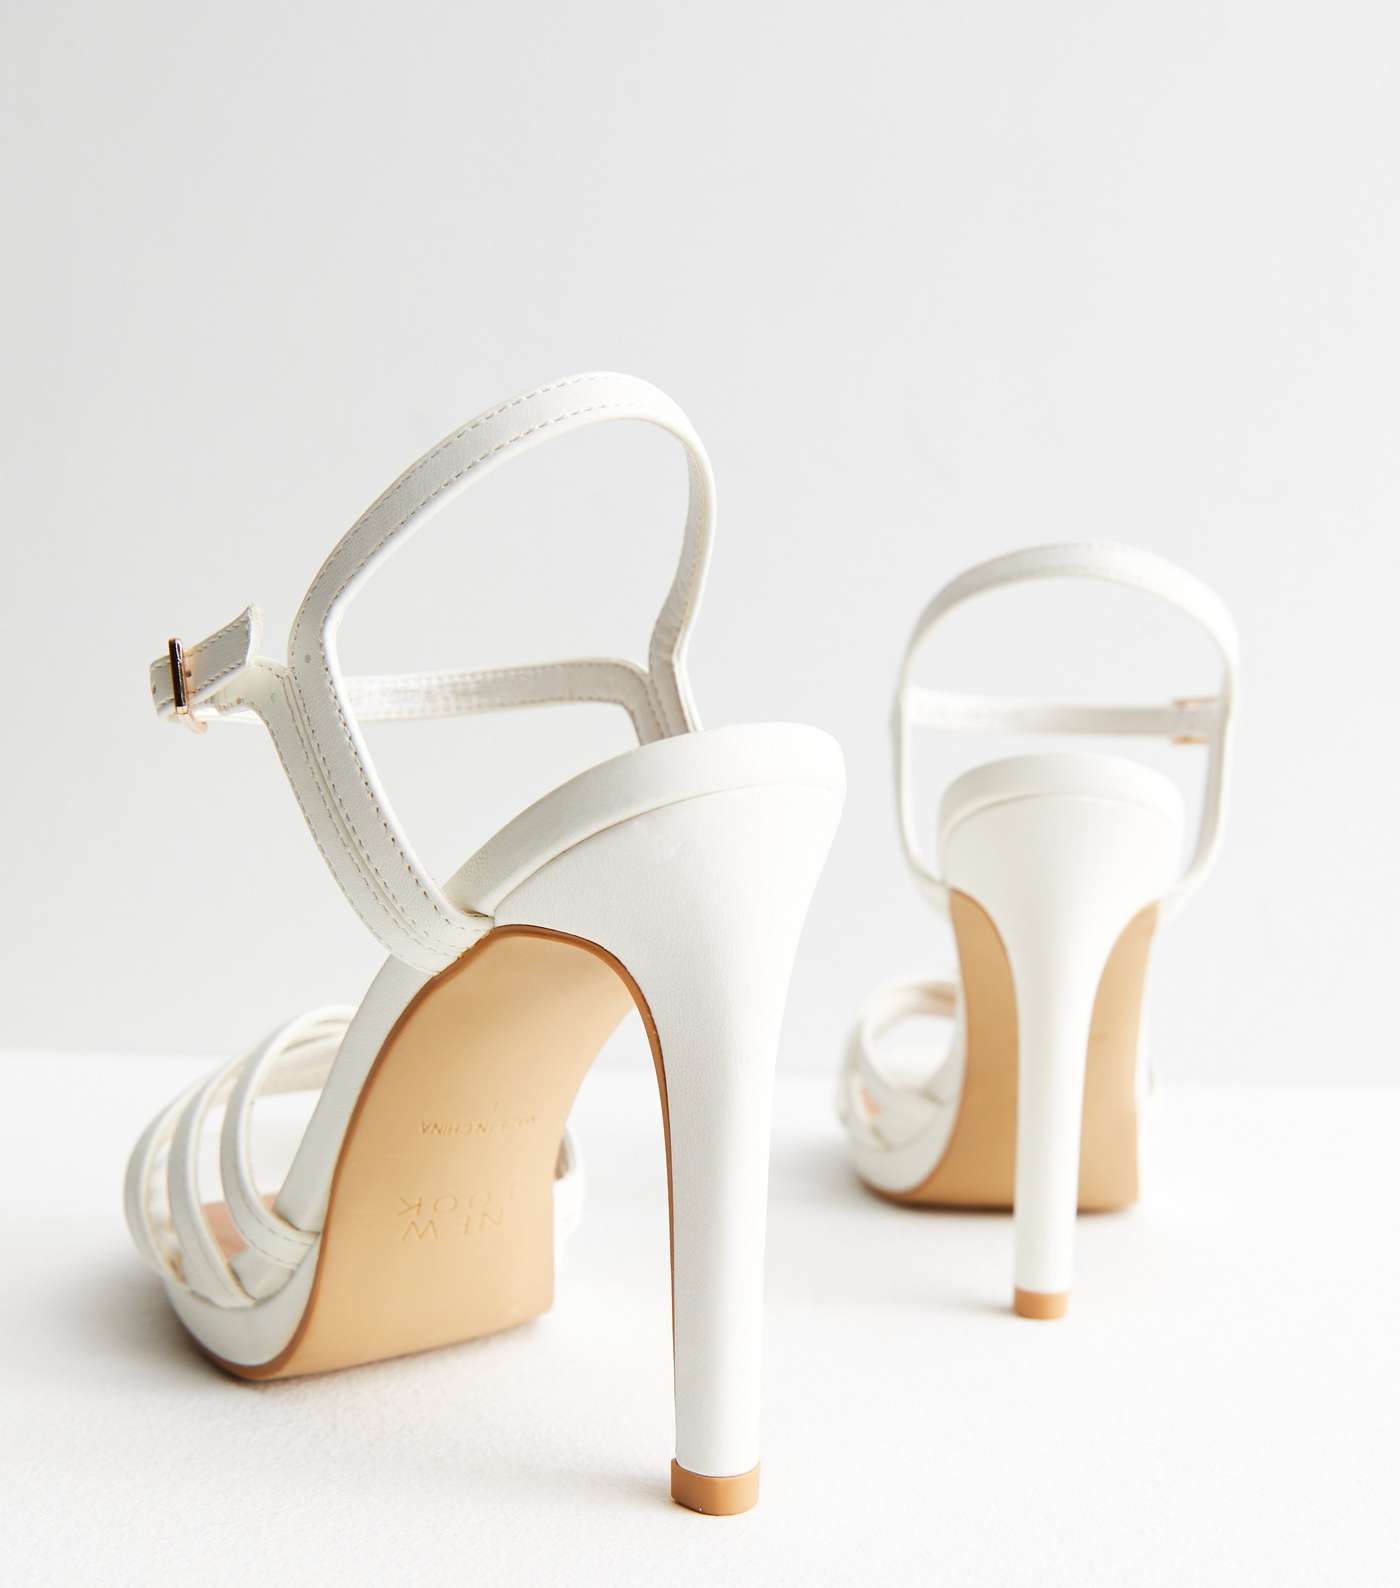 White Leather-Look 2 Part Strappy Stiletto Heel Sandals Image 4